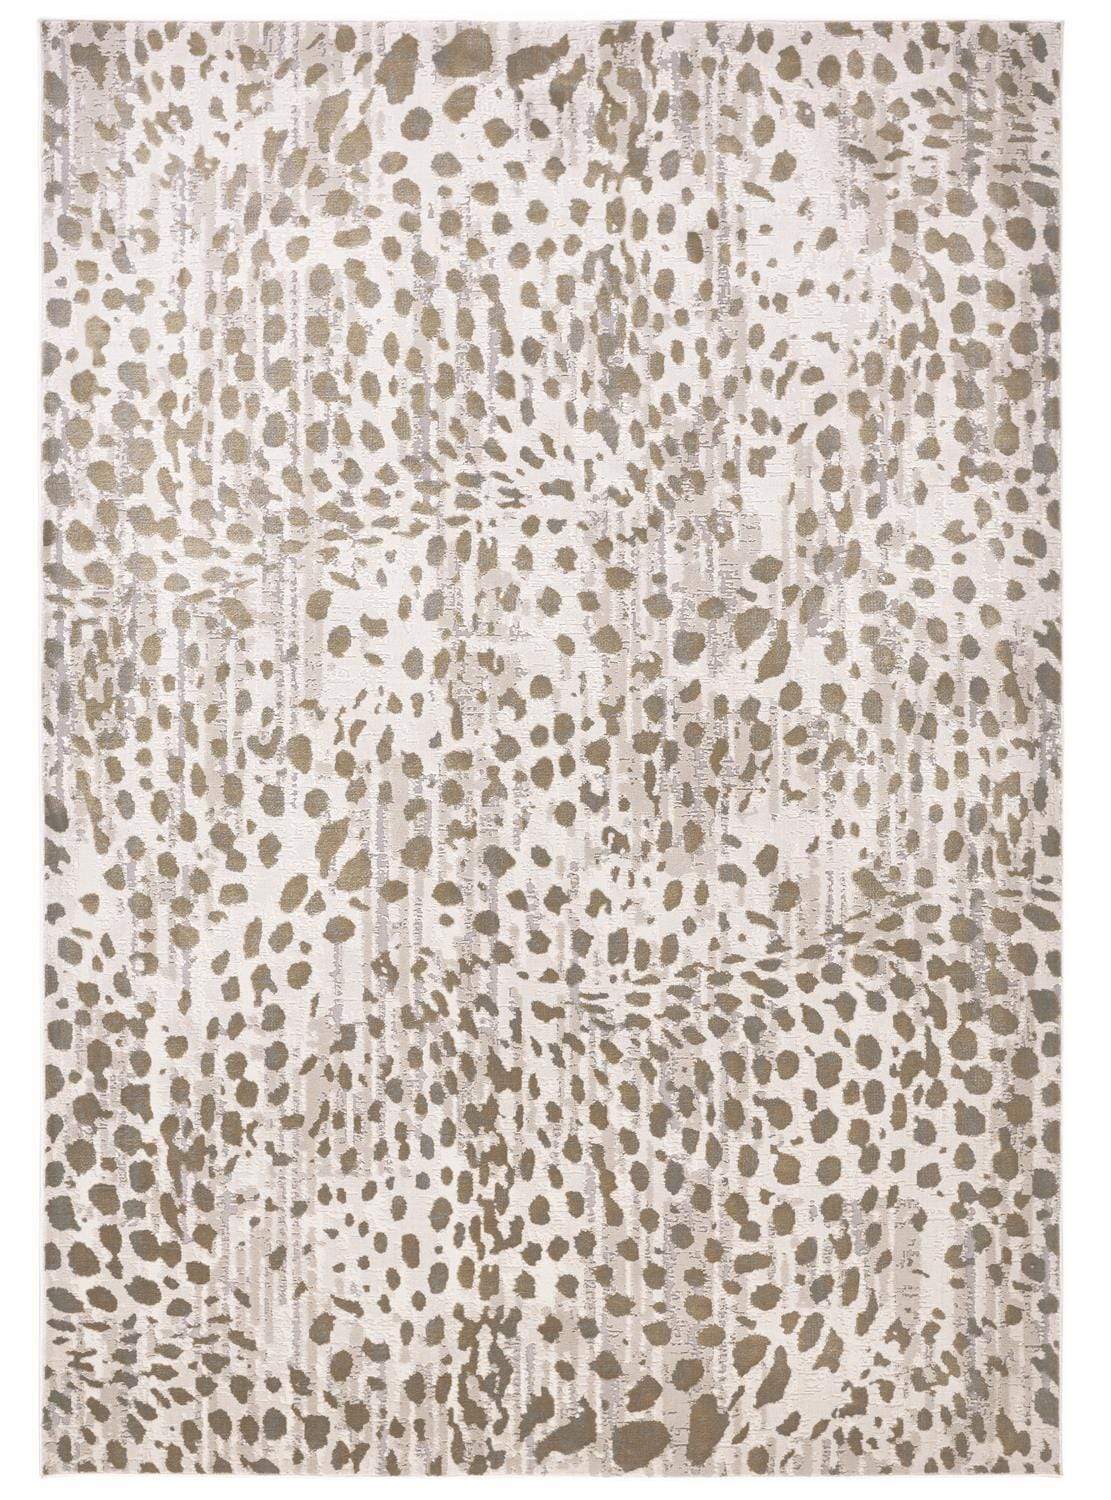 Feizy Waldor Metallic Animal Print Rug - Available in 7 Sizes - Brown & Ivory